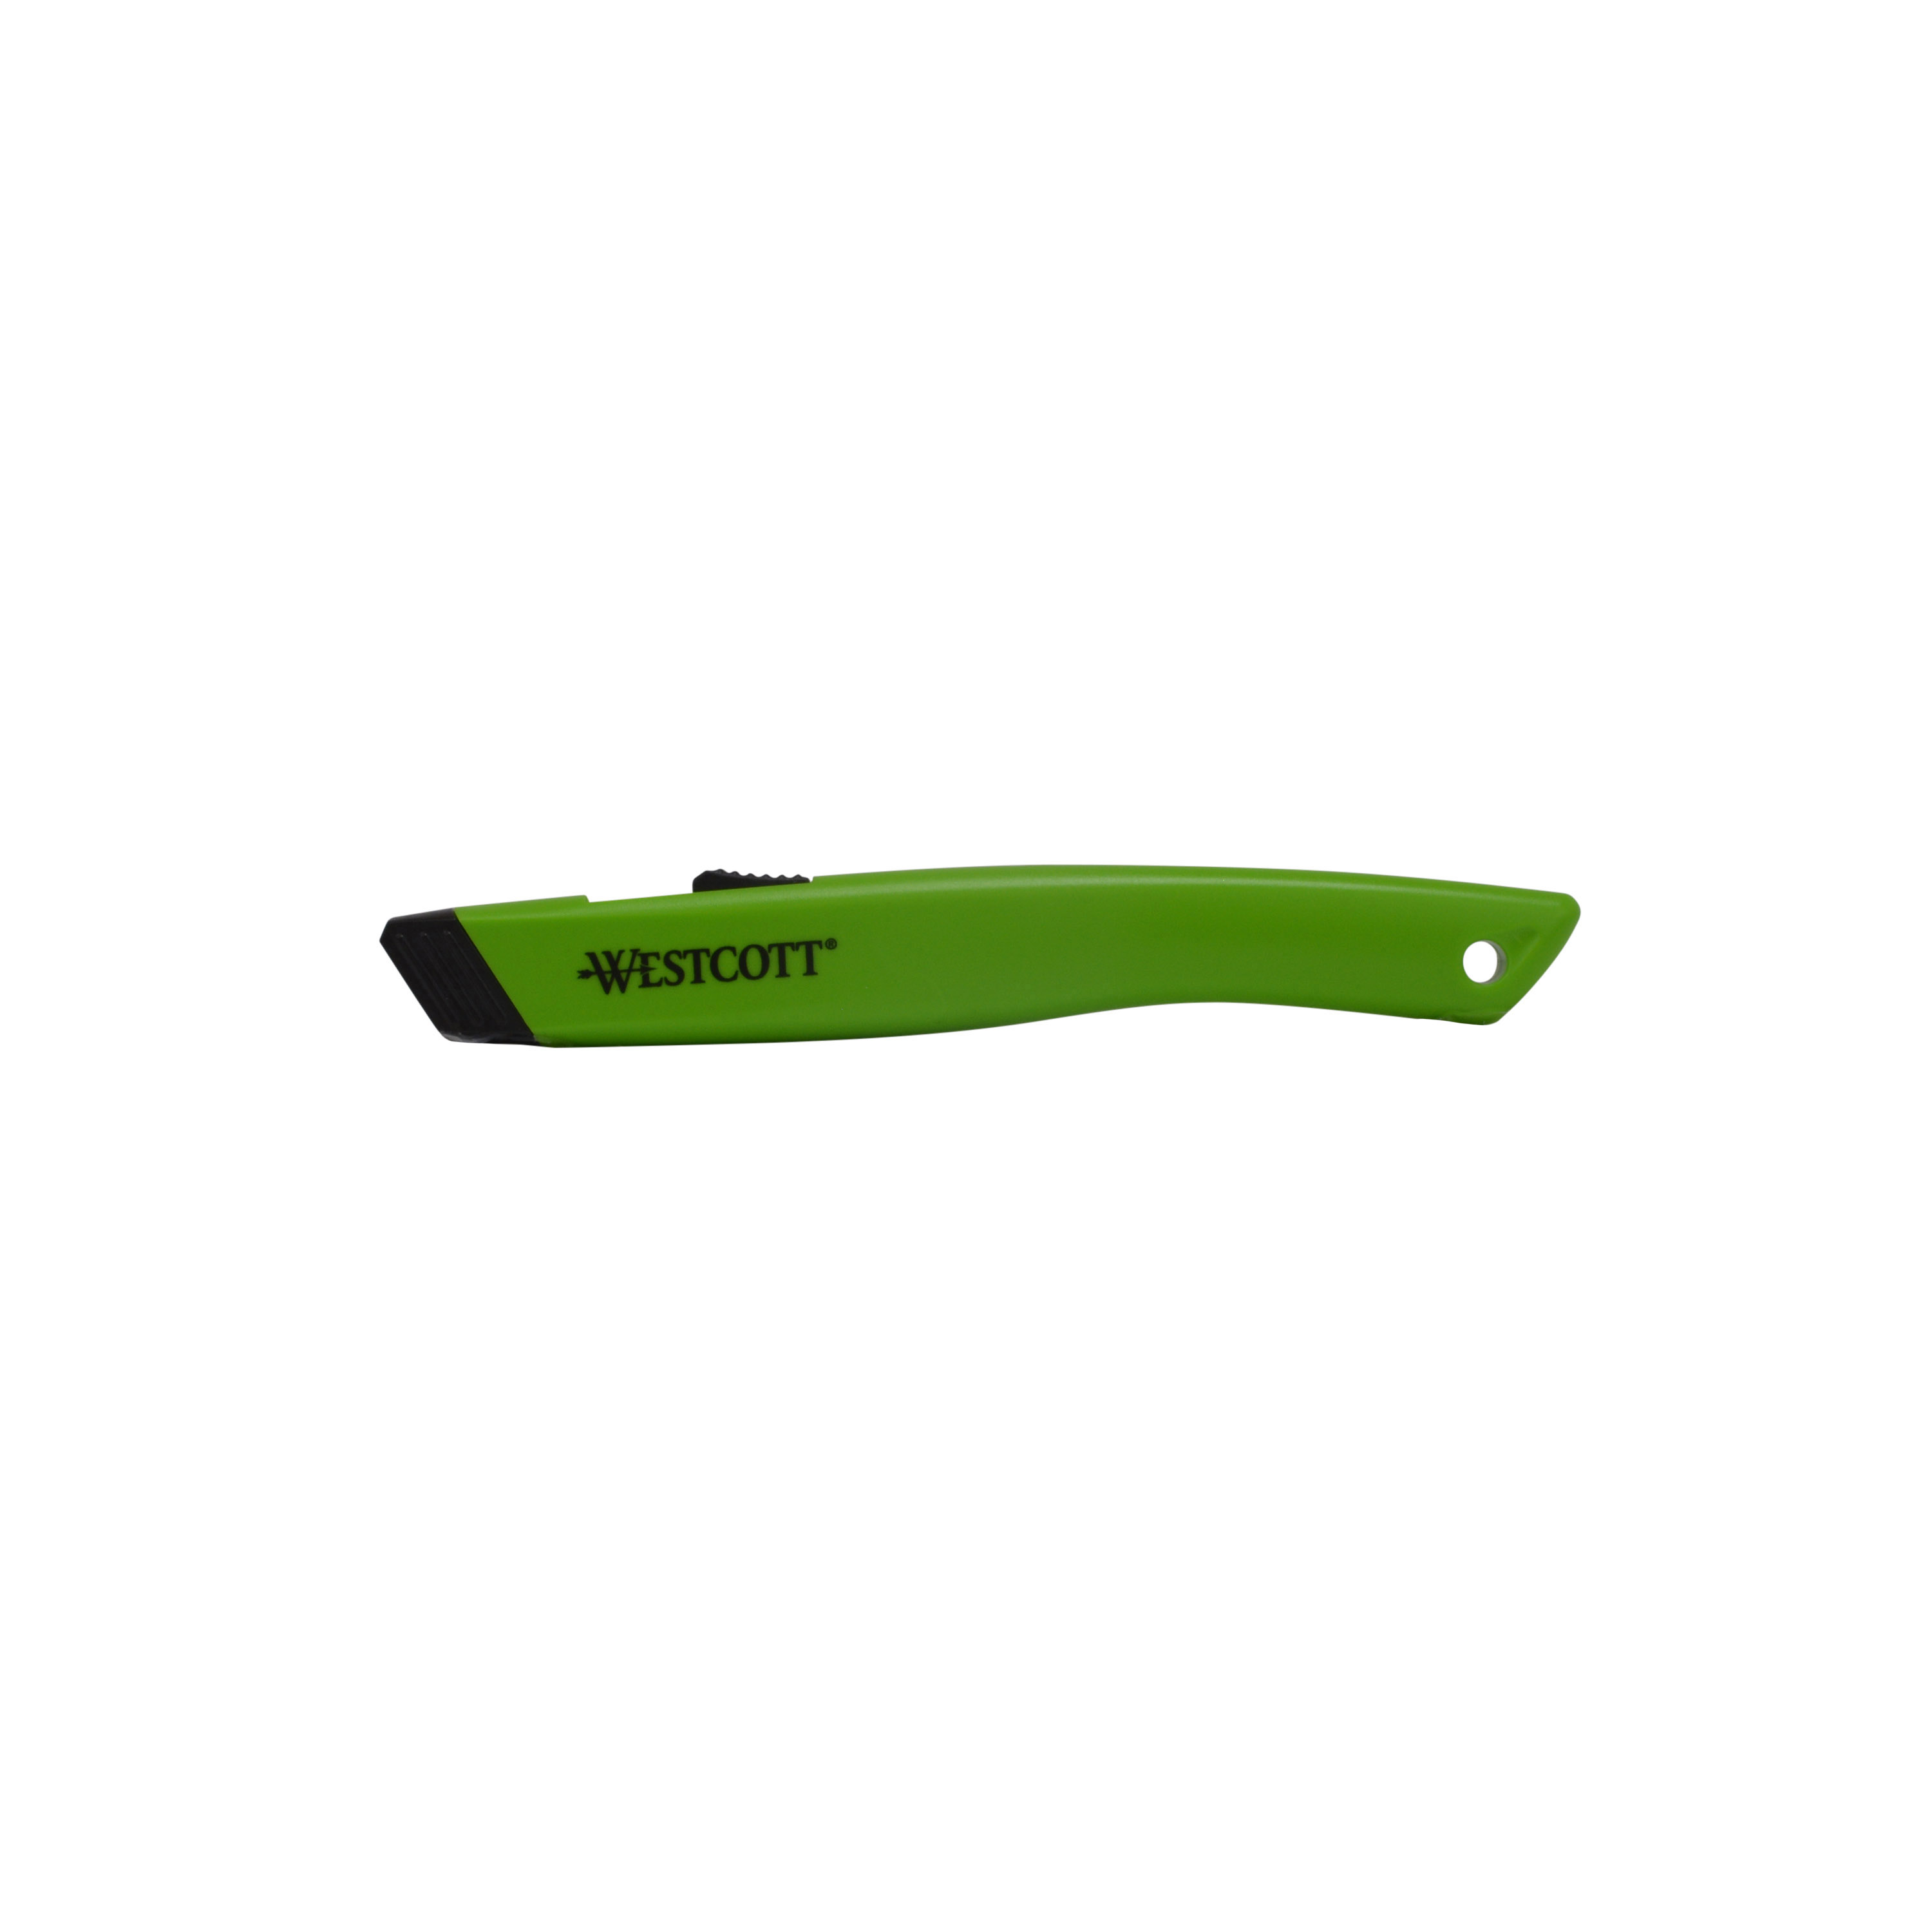 Westcott Full Size Retractable Box Cutter 17530 Finger Loop Lime Green 